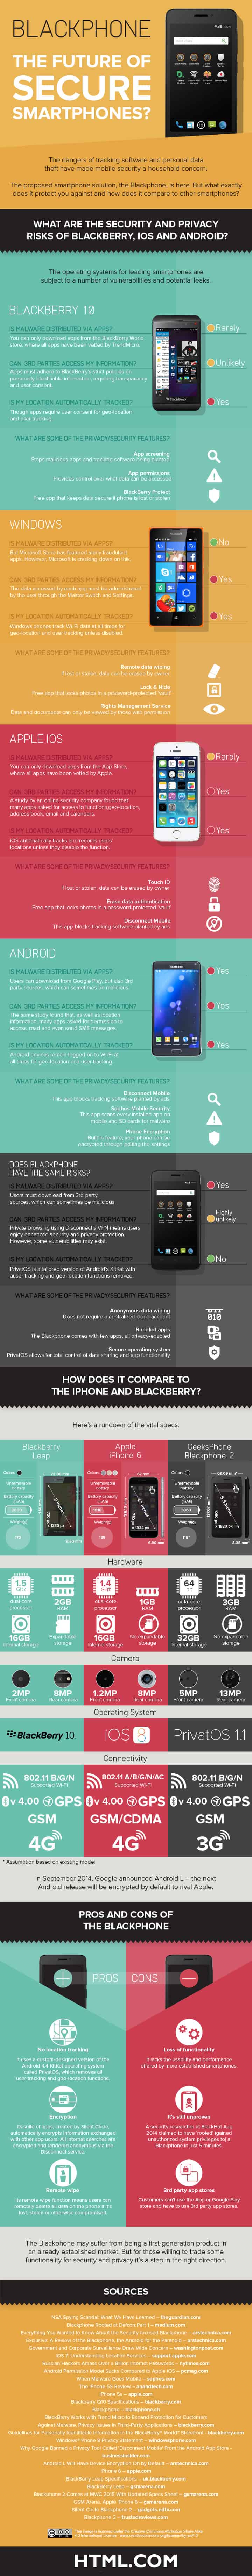 Is the Blackphone the future of smartphones infographic